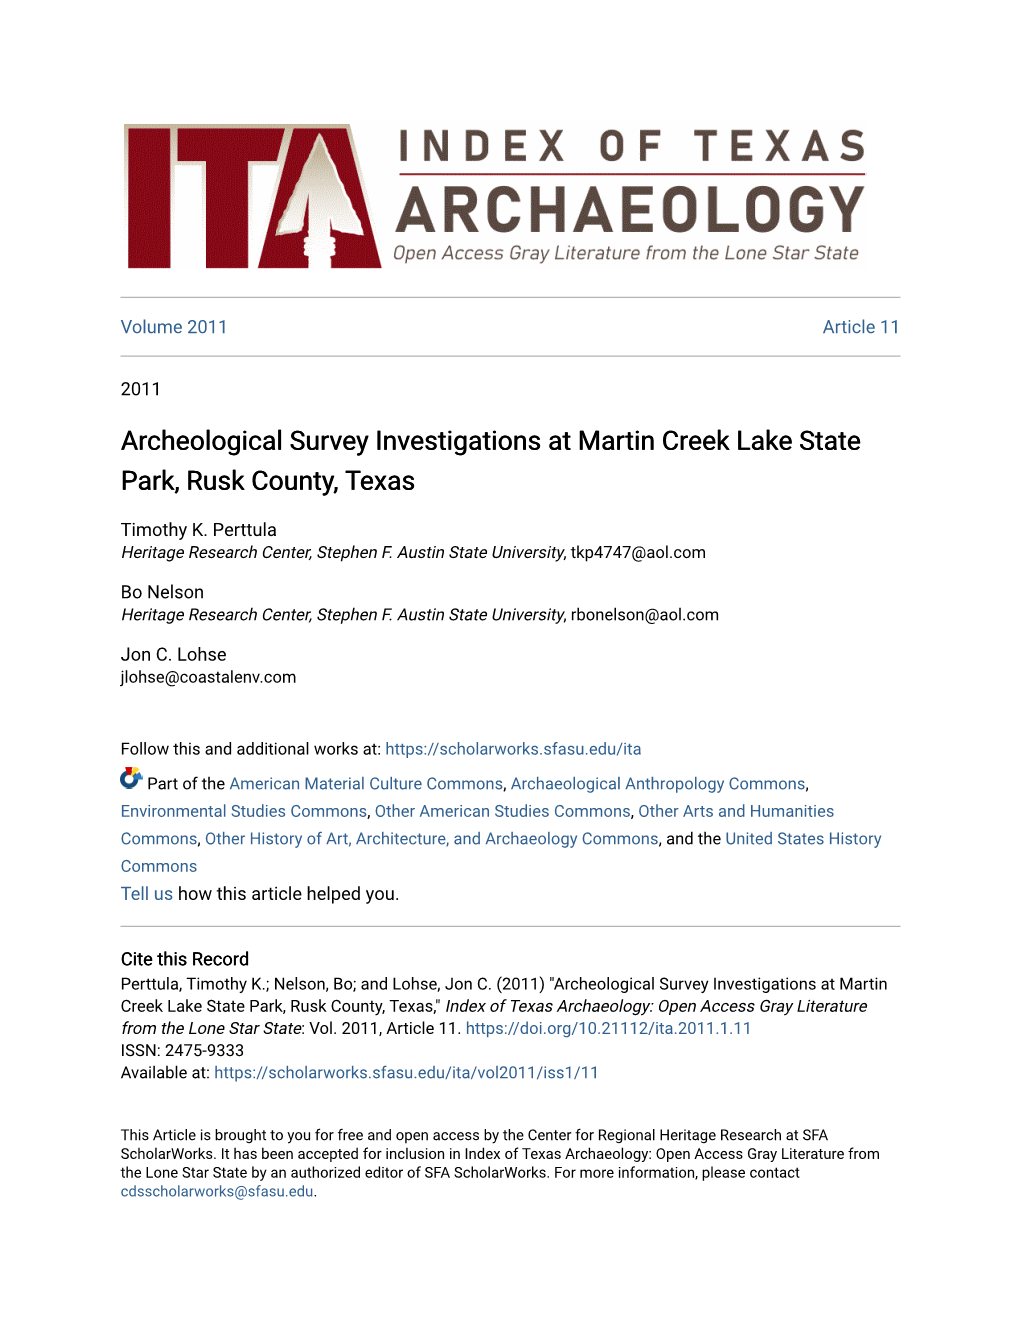 Archeological Survey Investigations at Martin Creek Lake State Park, Rusk County, Texas